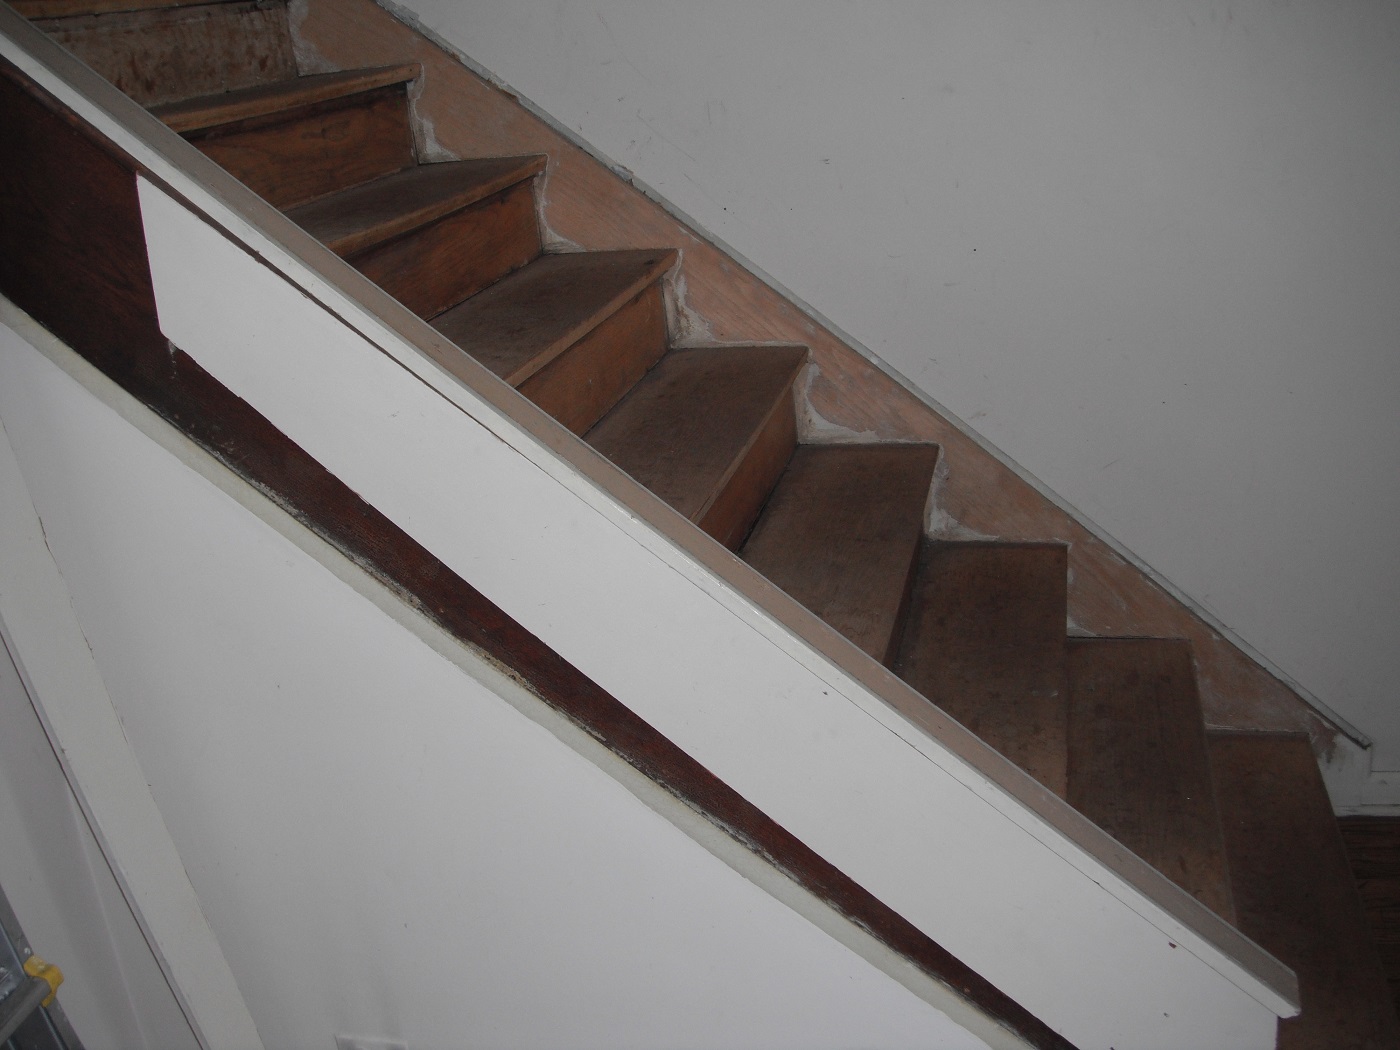 The stairs are missing railngs and a hand rail. "Berwyn Home Inspection"